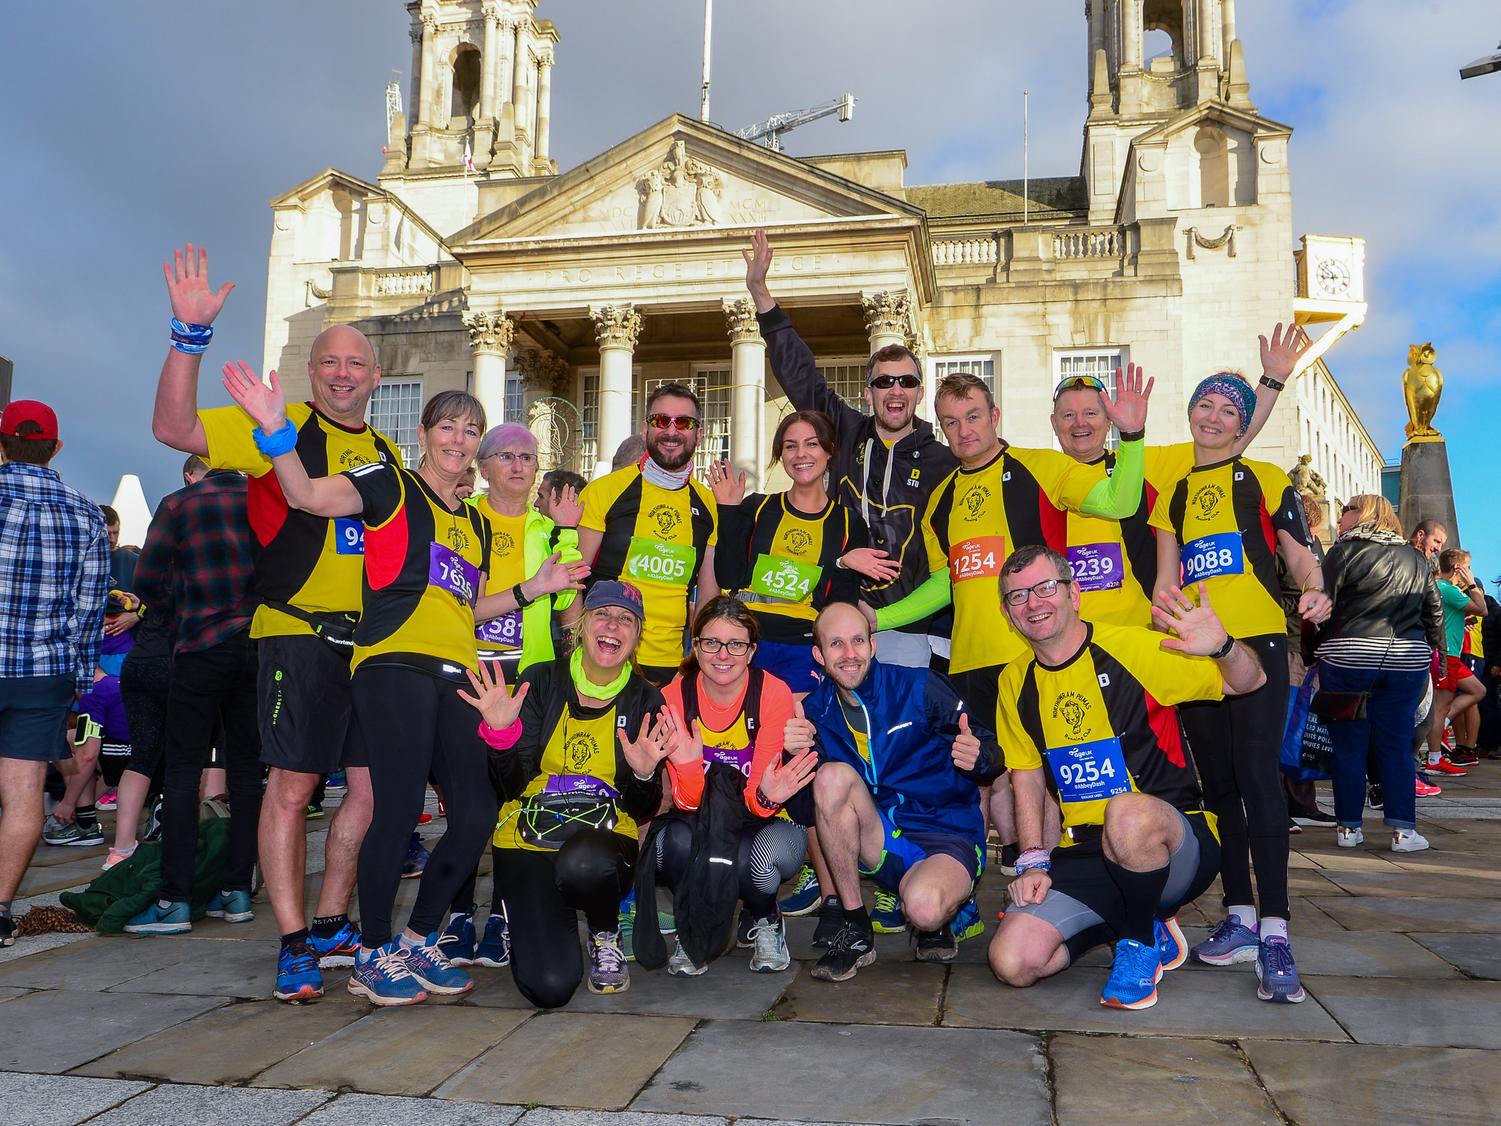 A group of runners stop for a photograph outside Leeds Civic Hall.